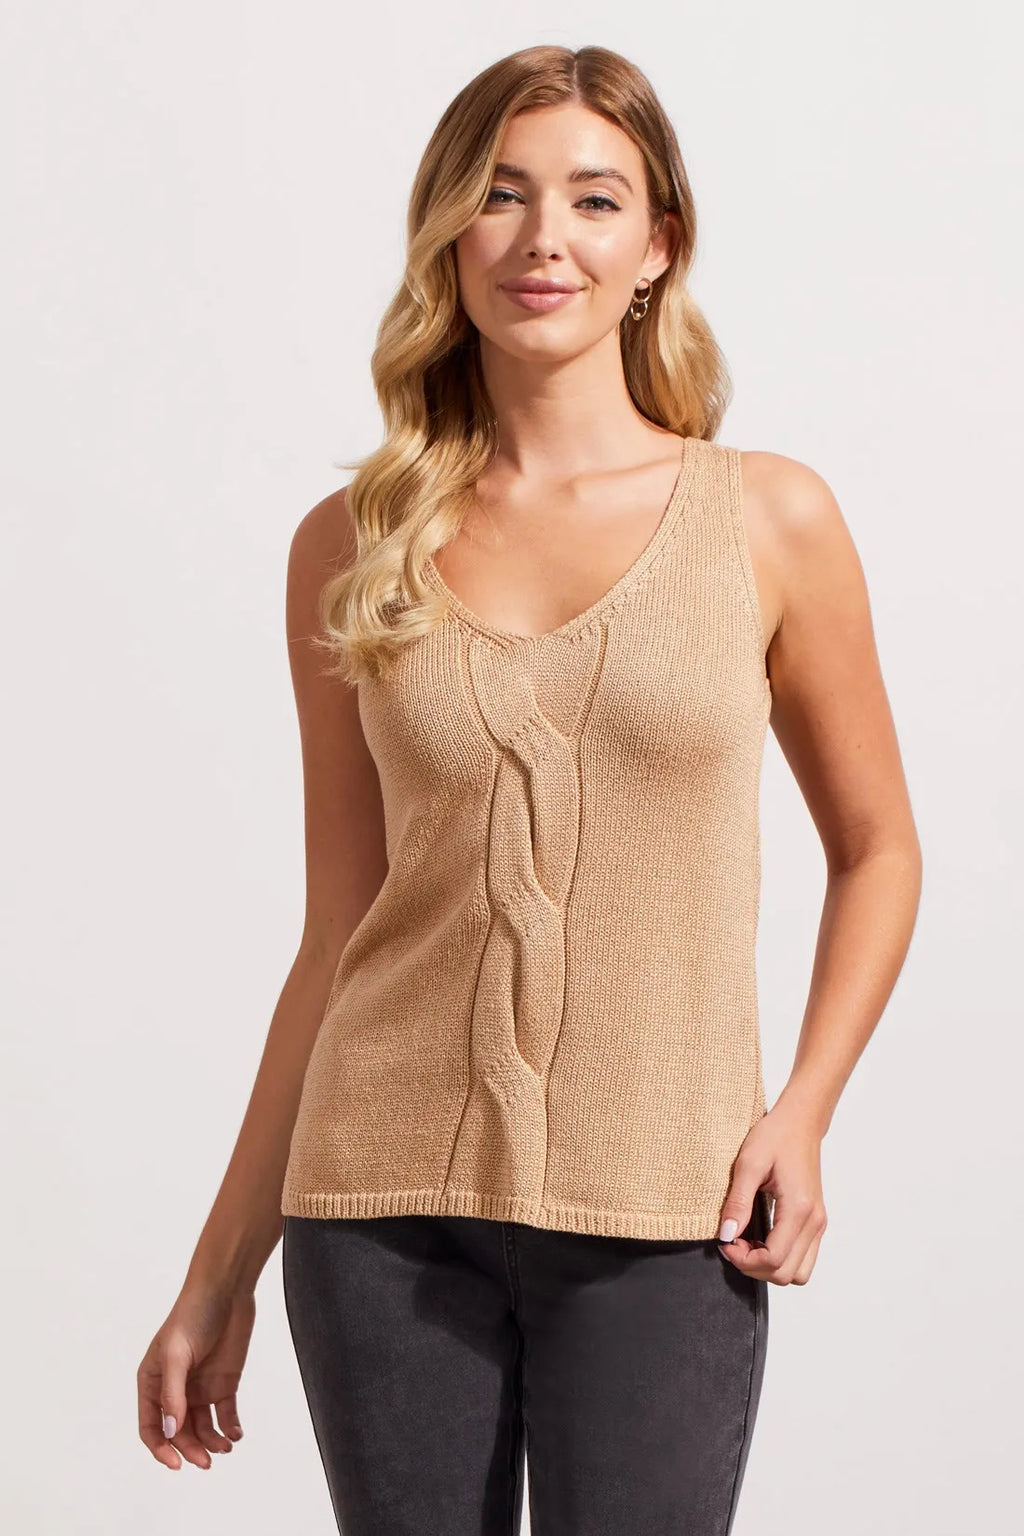 Tribal Fashions Sleeveless Cable Knit Sweater - Ginger Root